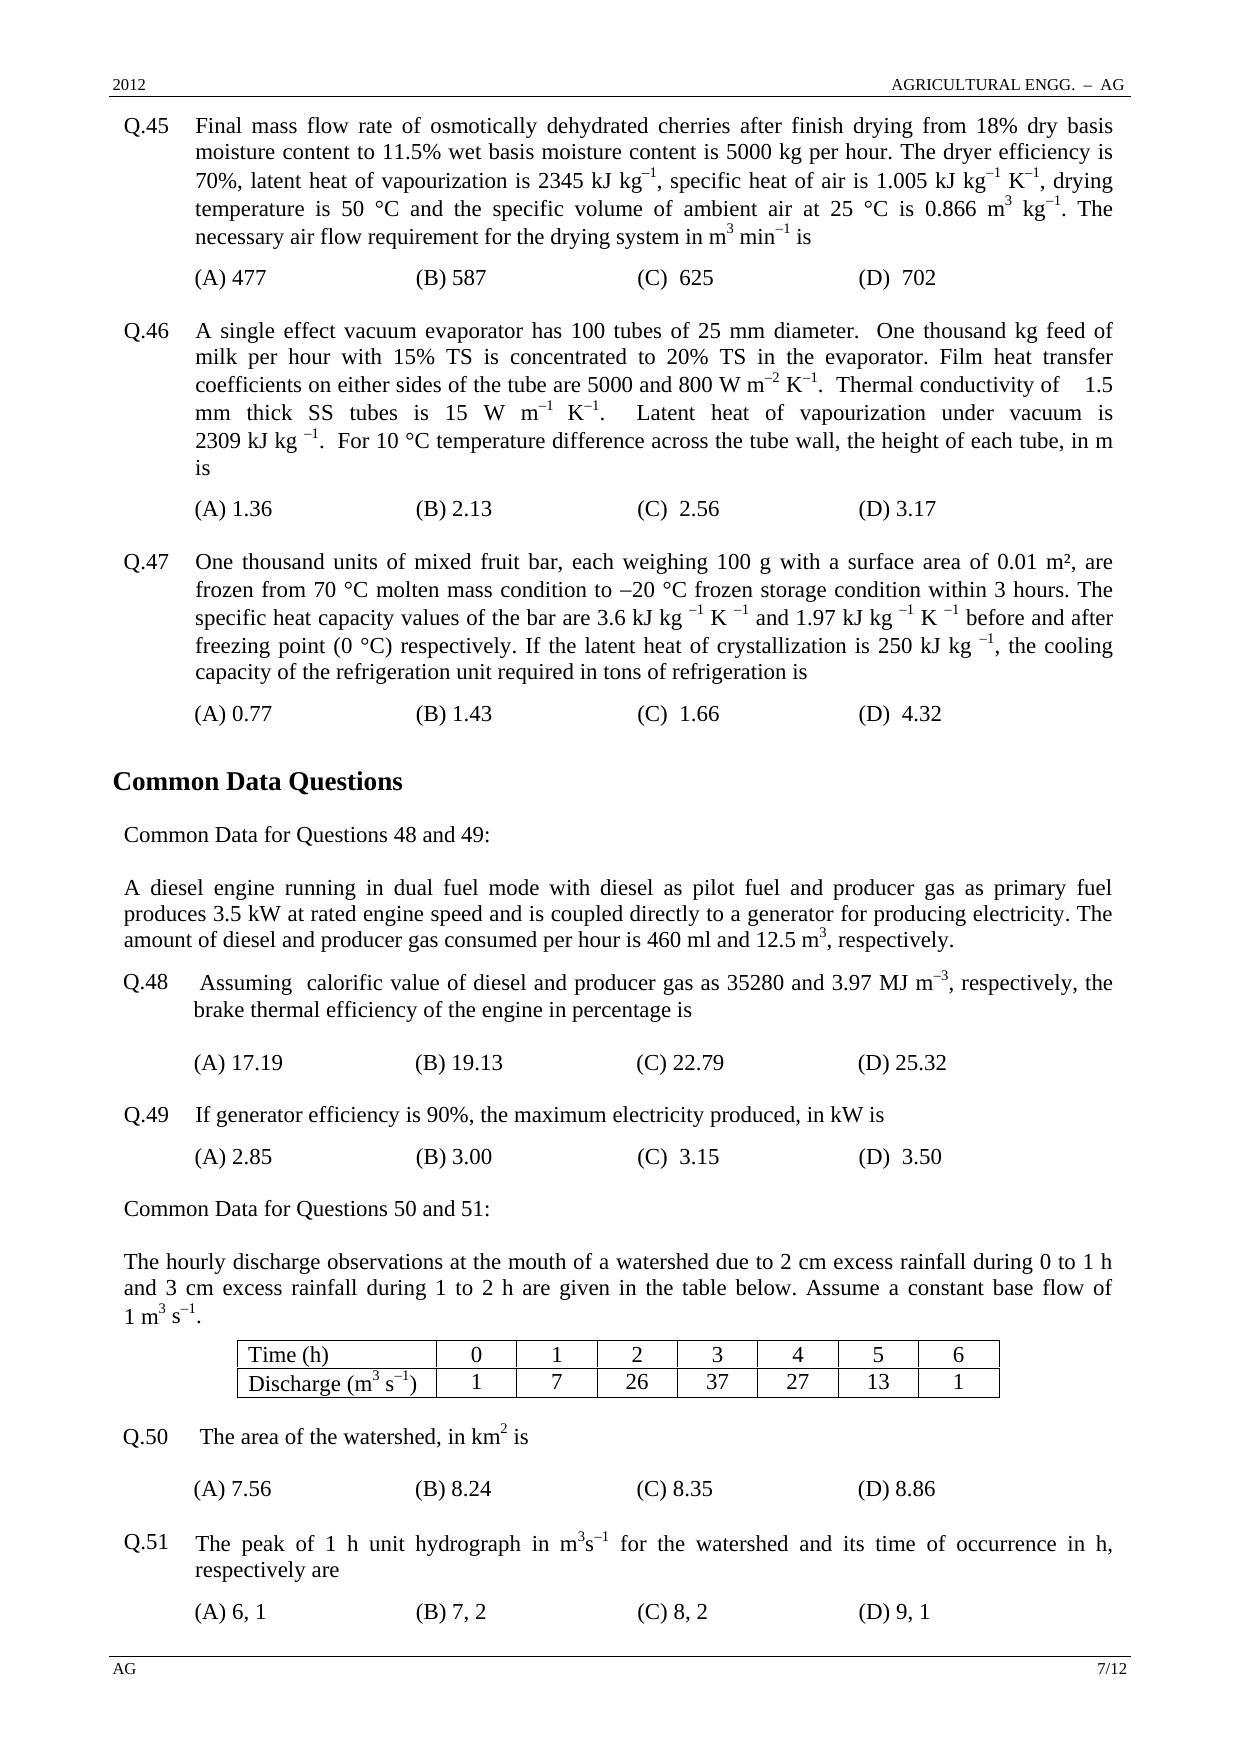 GATE 2012 Agricultural Engineering (AG) Question Paper with Answer Key - Page 7